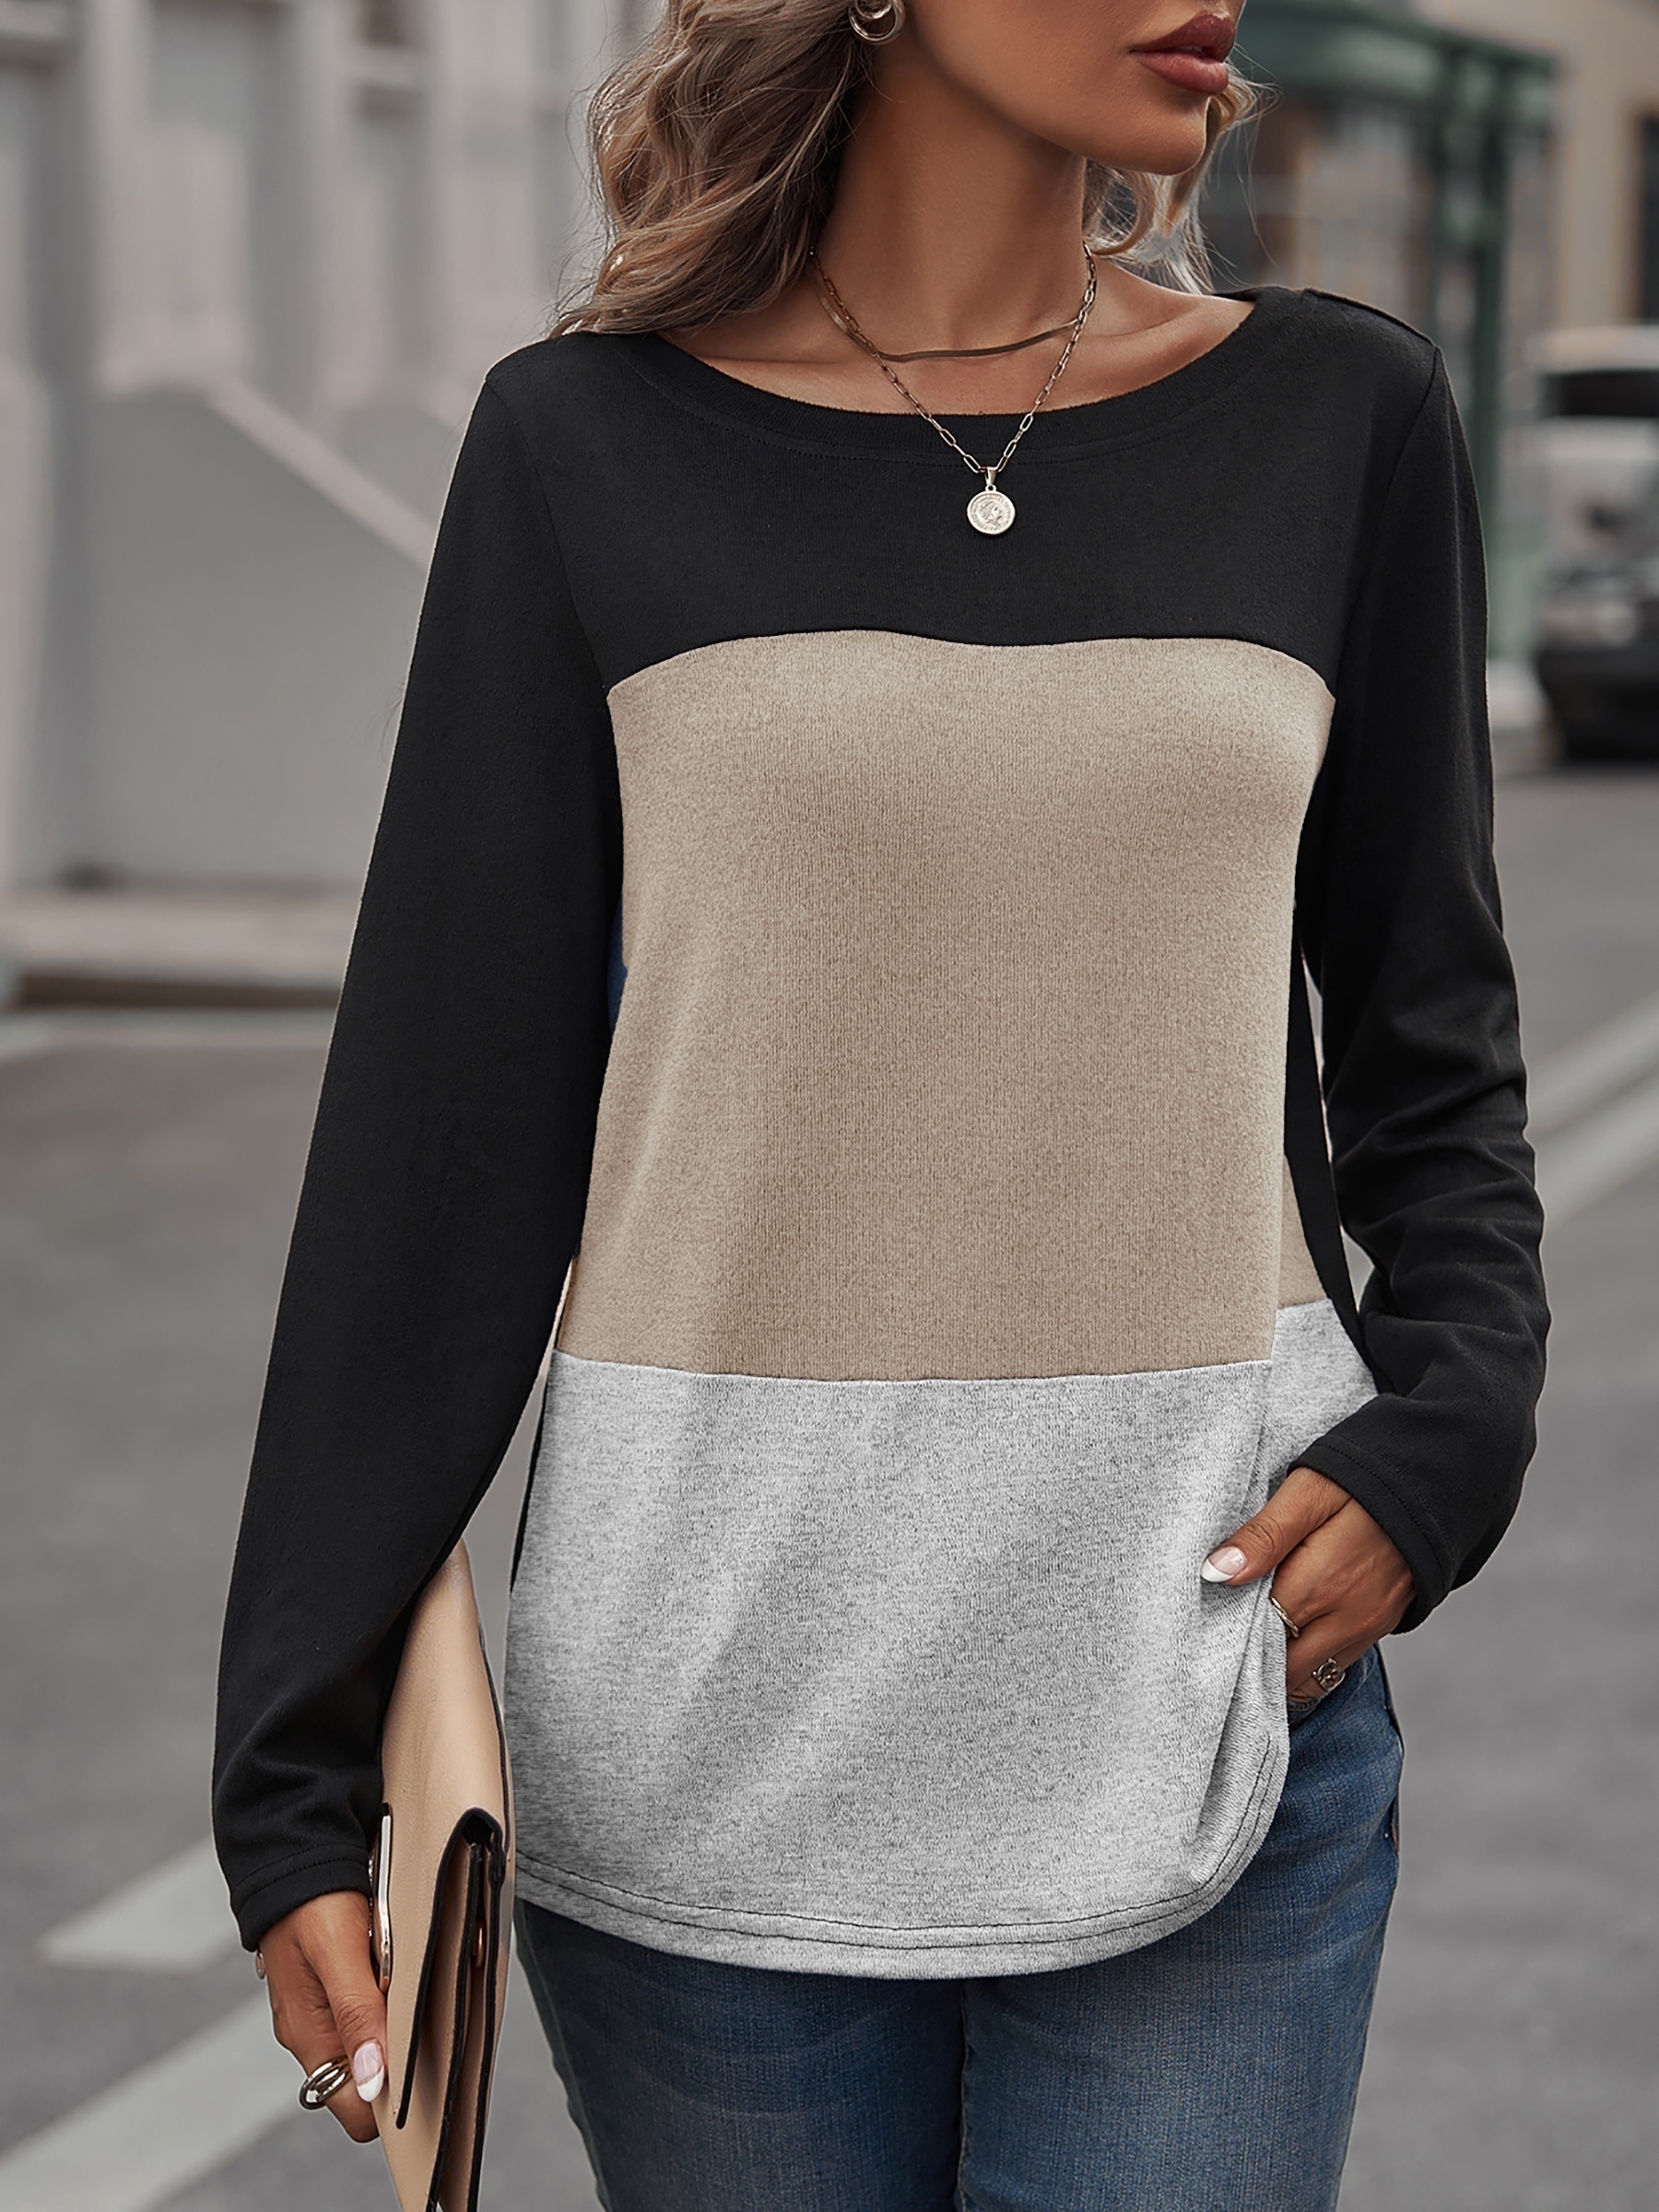 gvdentm Shirts For Women Big And Tall Women'S Long Sleeve T-Shirts Long  Sleeve Color Block Cute Tops Comfy Blouses 